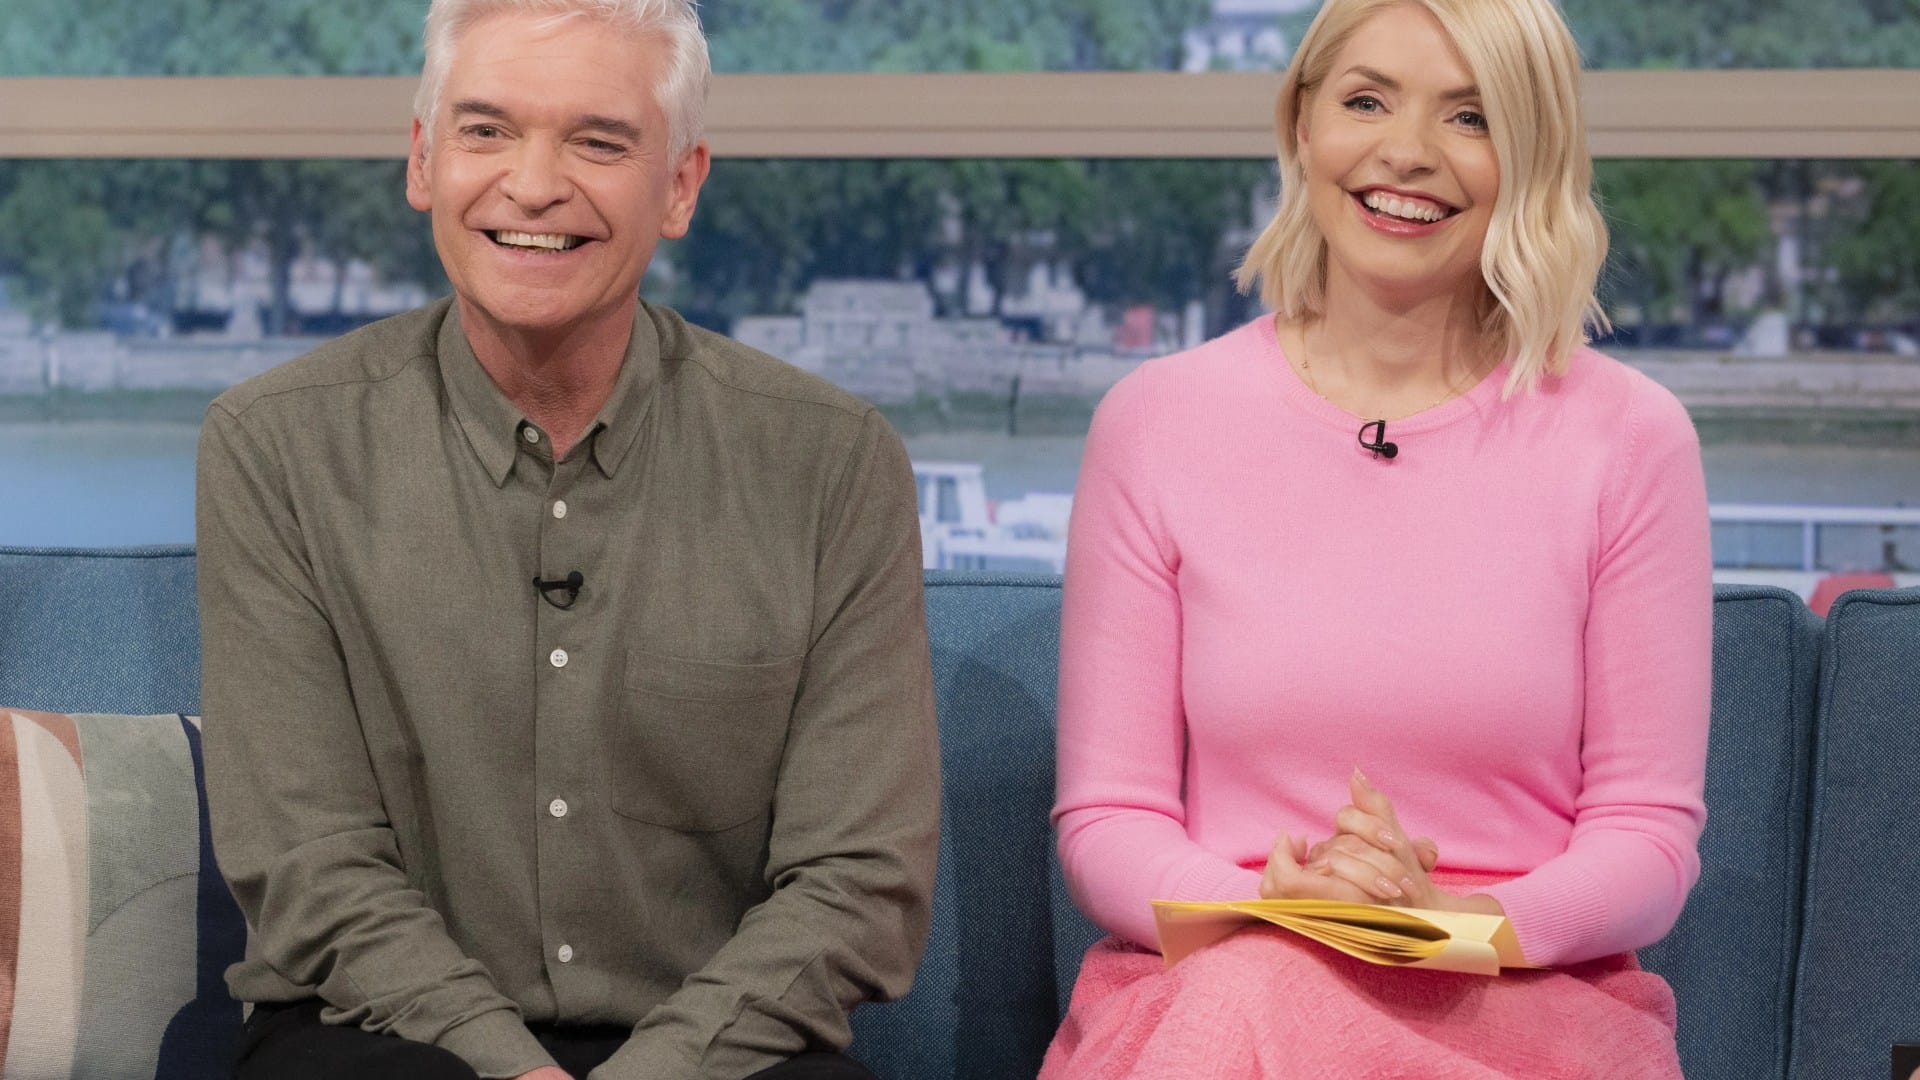 GMB’s Ben Shephard to ‘replace Phillip Schofield’ as Holly Willoughby’s This Morning co-host